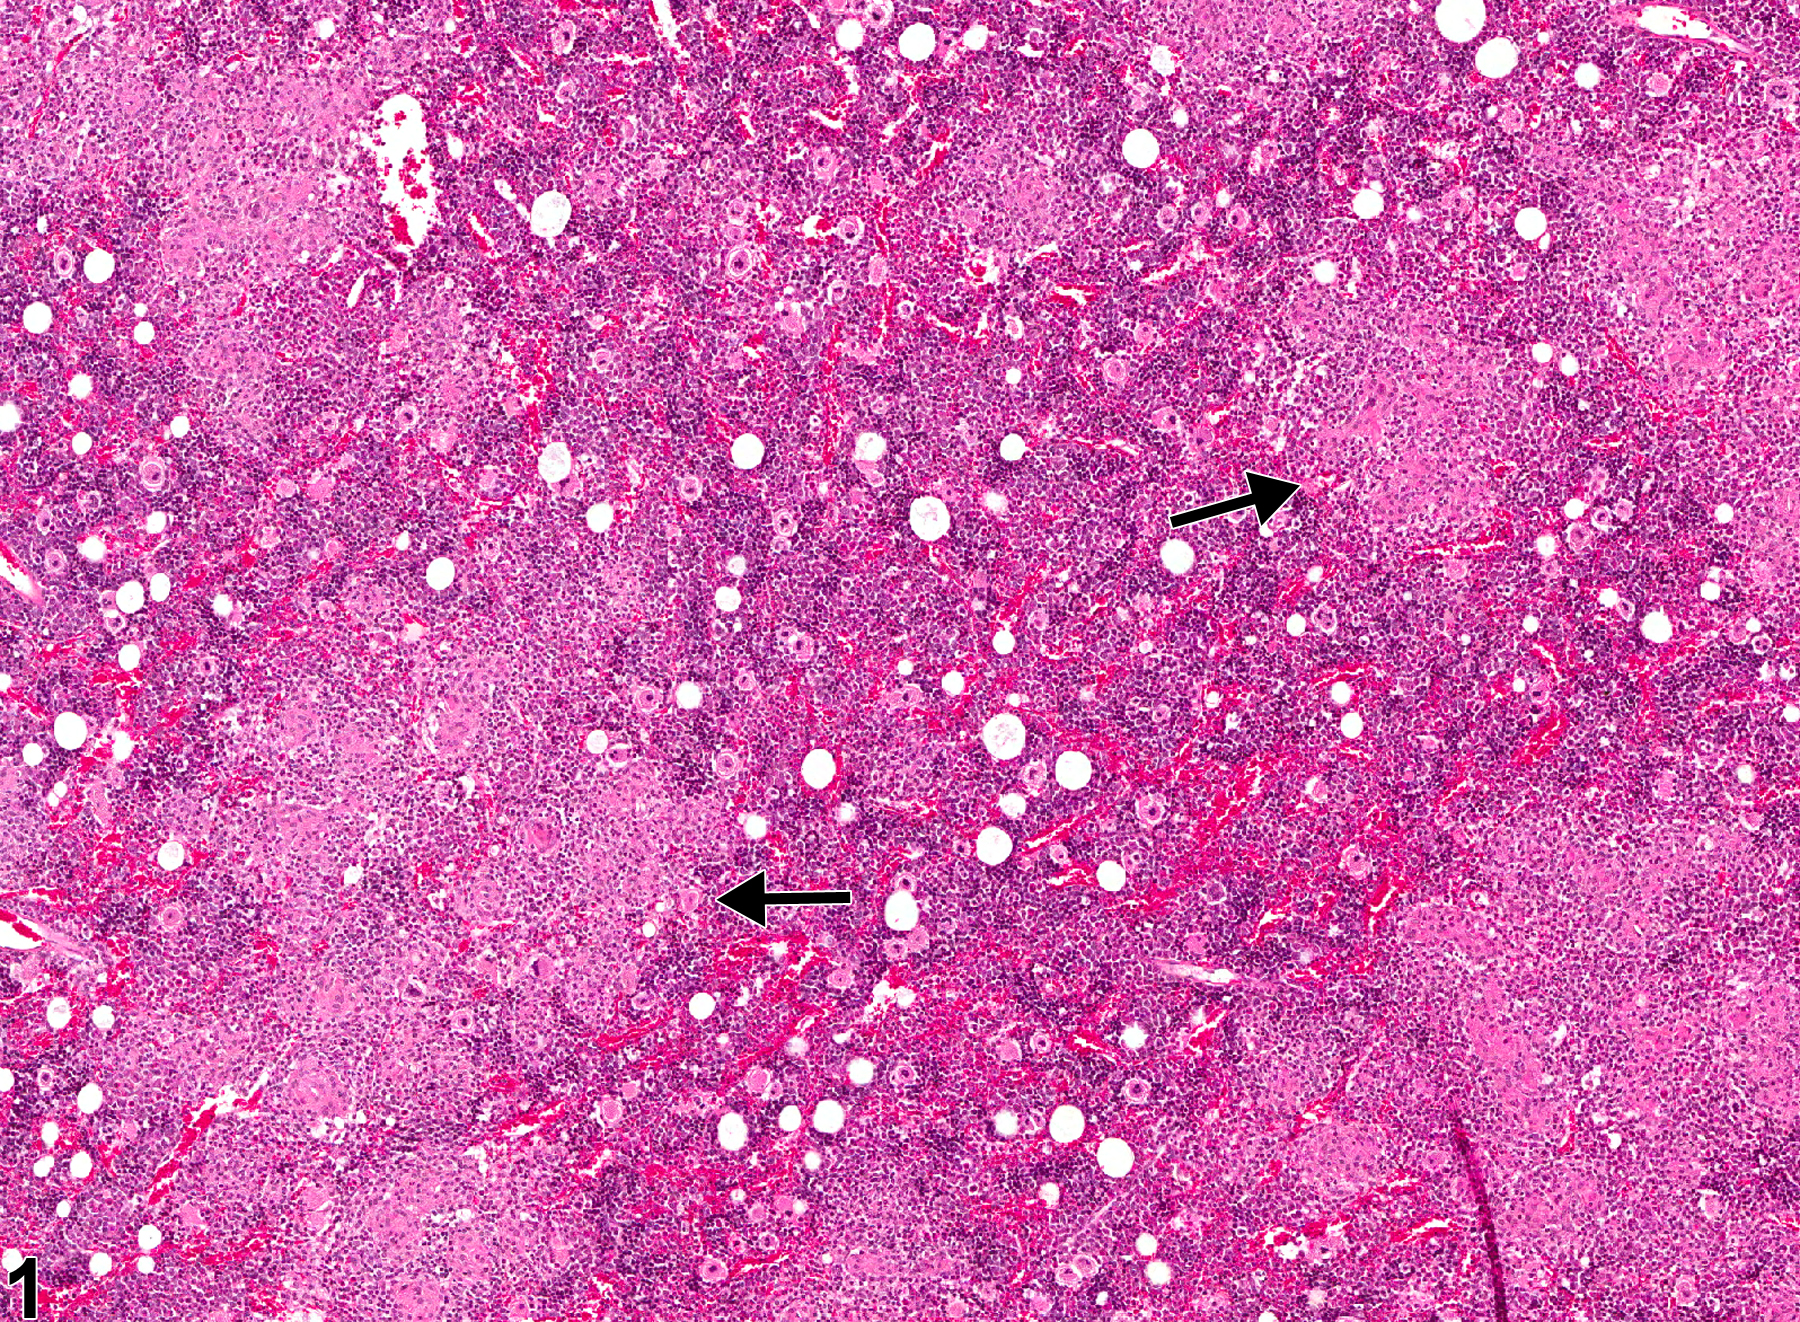 Image of inflammation in the bone marrow from a male F344/N rat in a chronic study